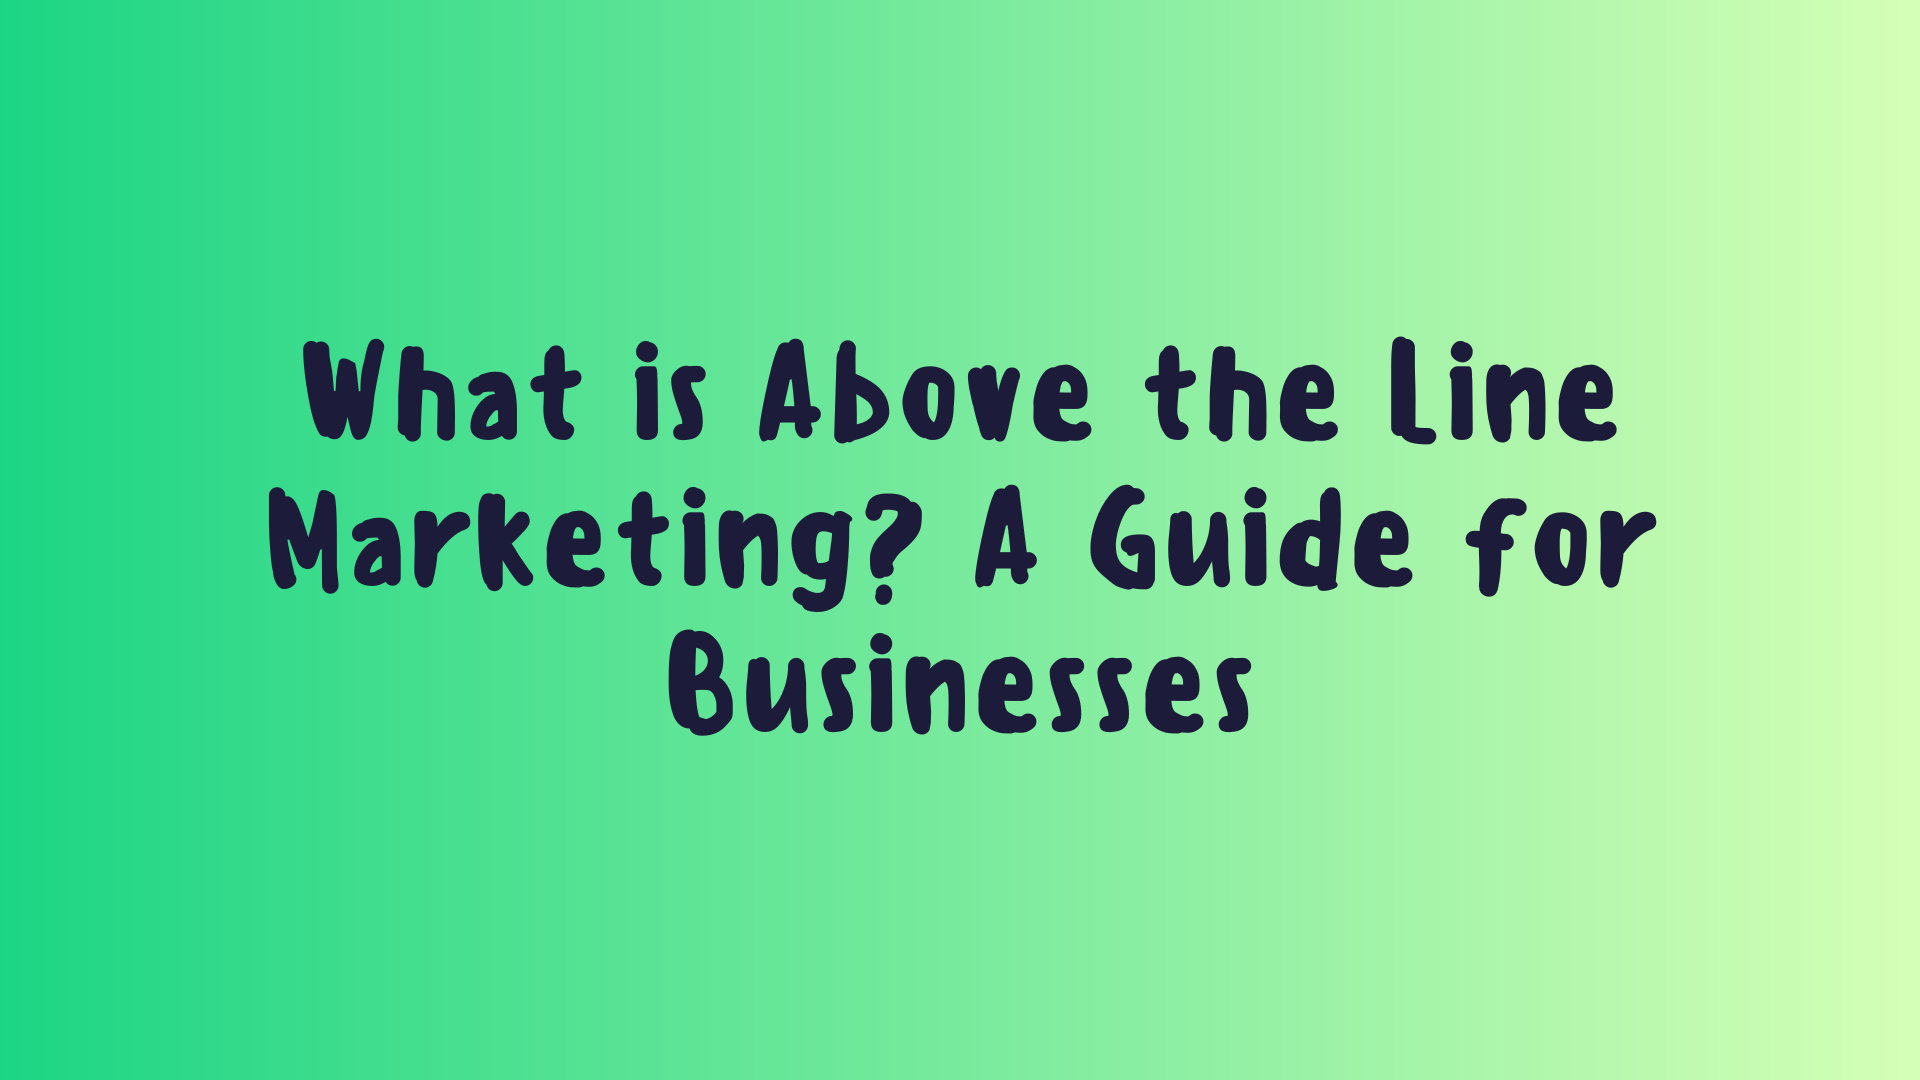 What is Above the Line Marketing? A Guide for Businesses